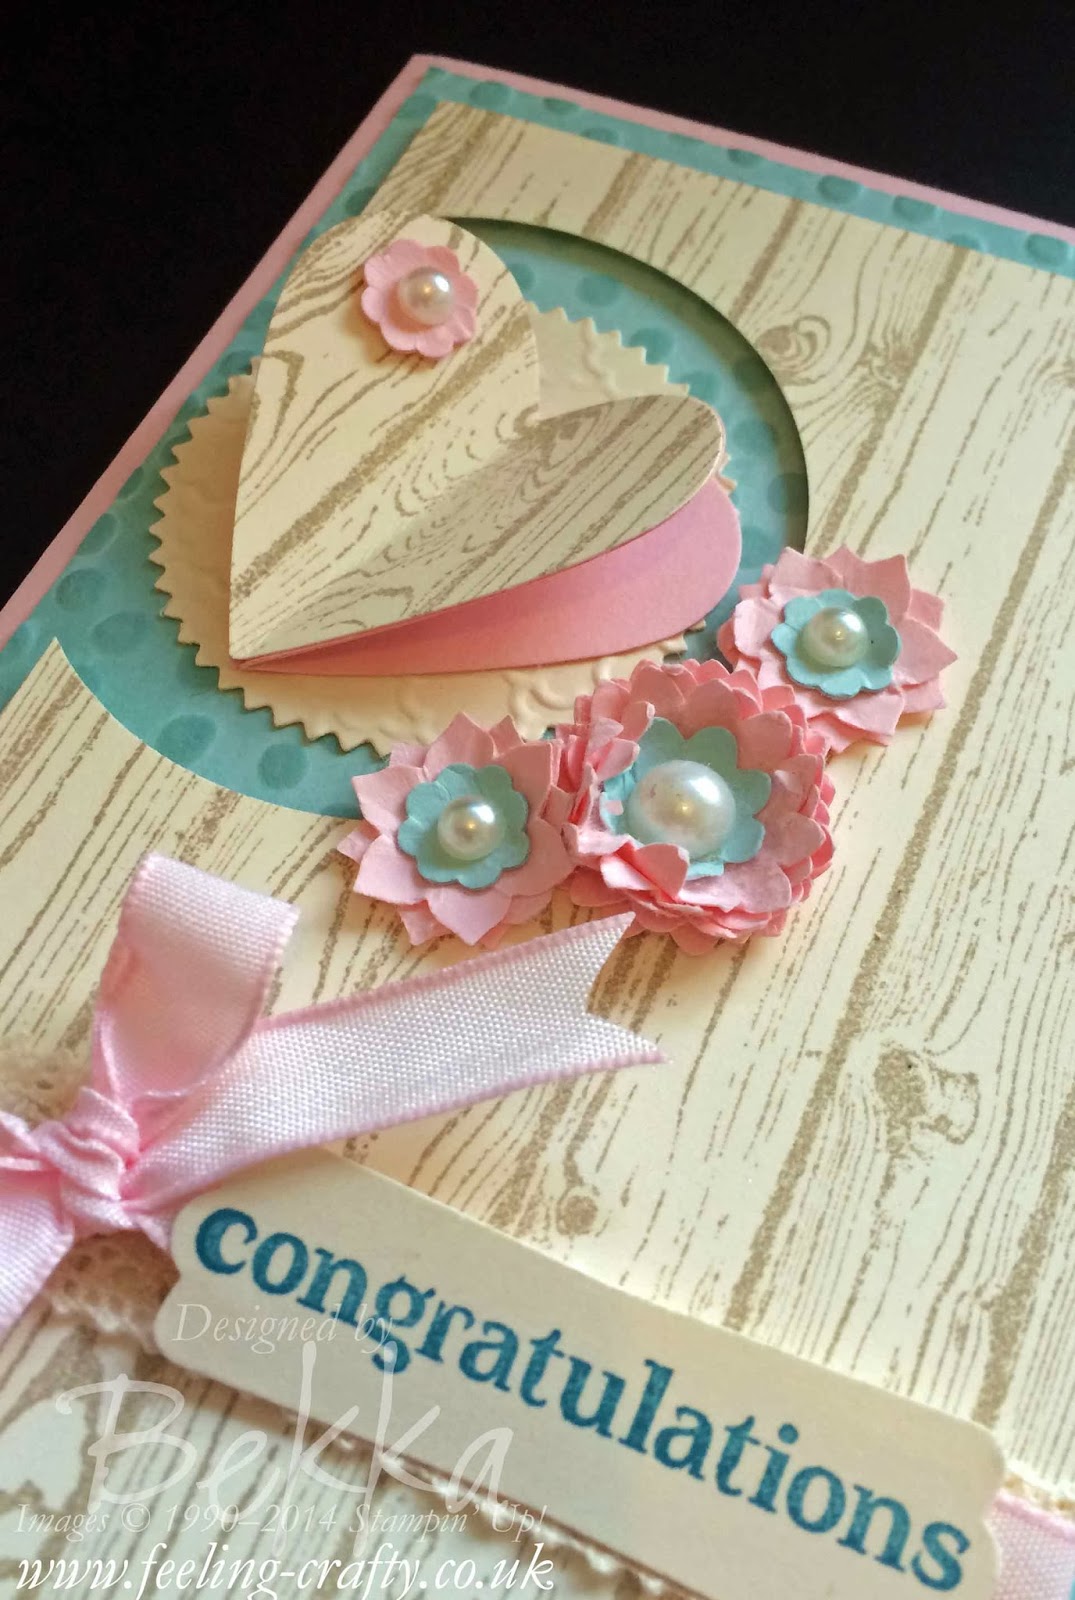 Engagement Congratulations Card made with Stampin' Up! Supplies - find out more here